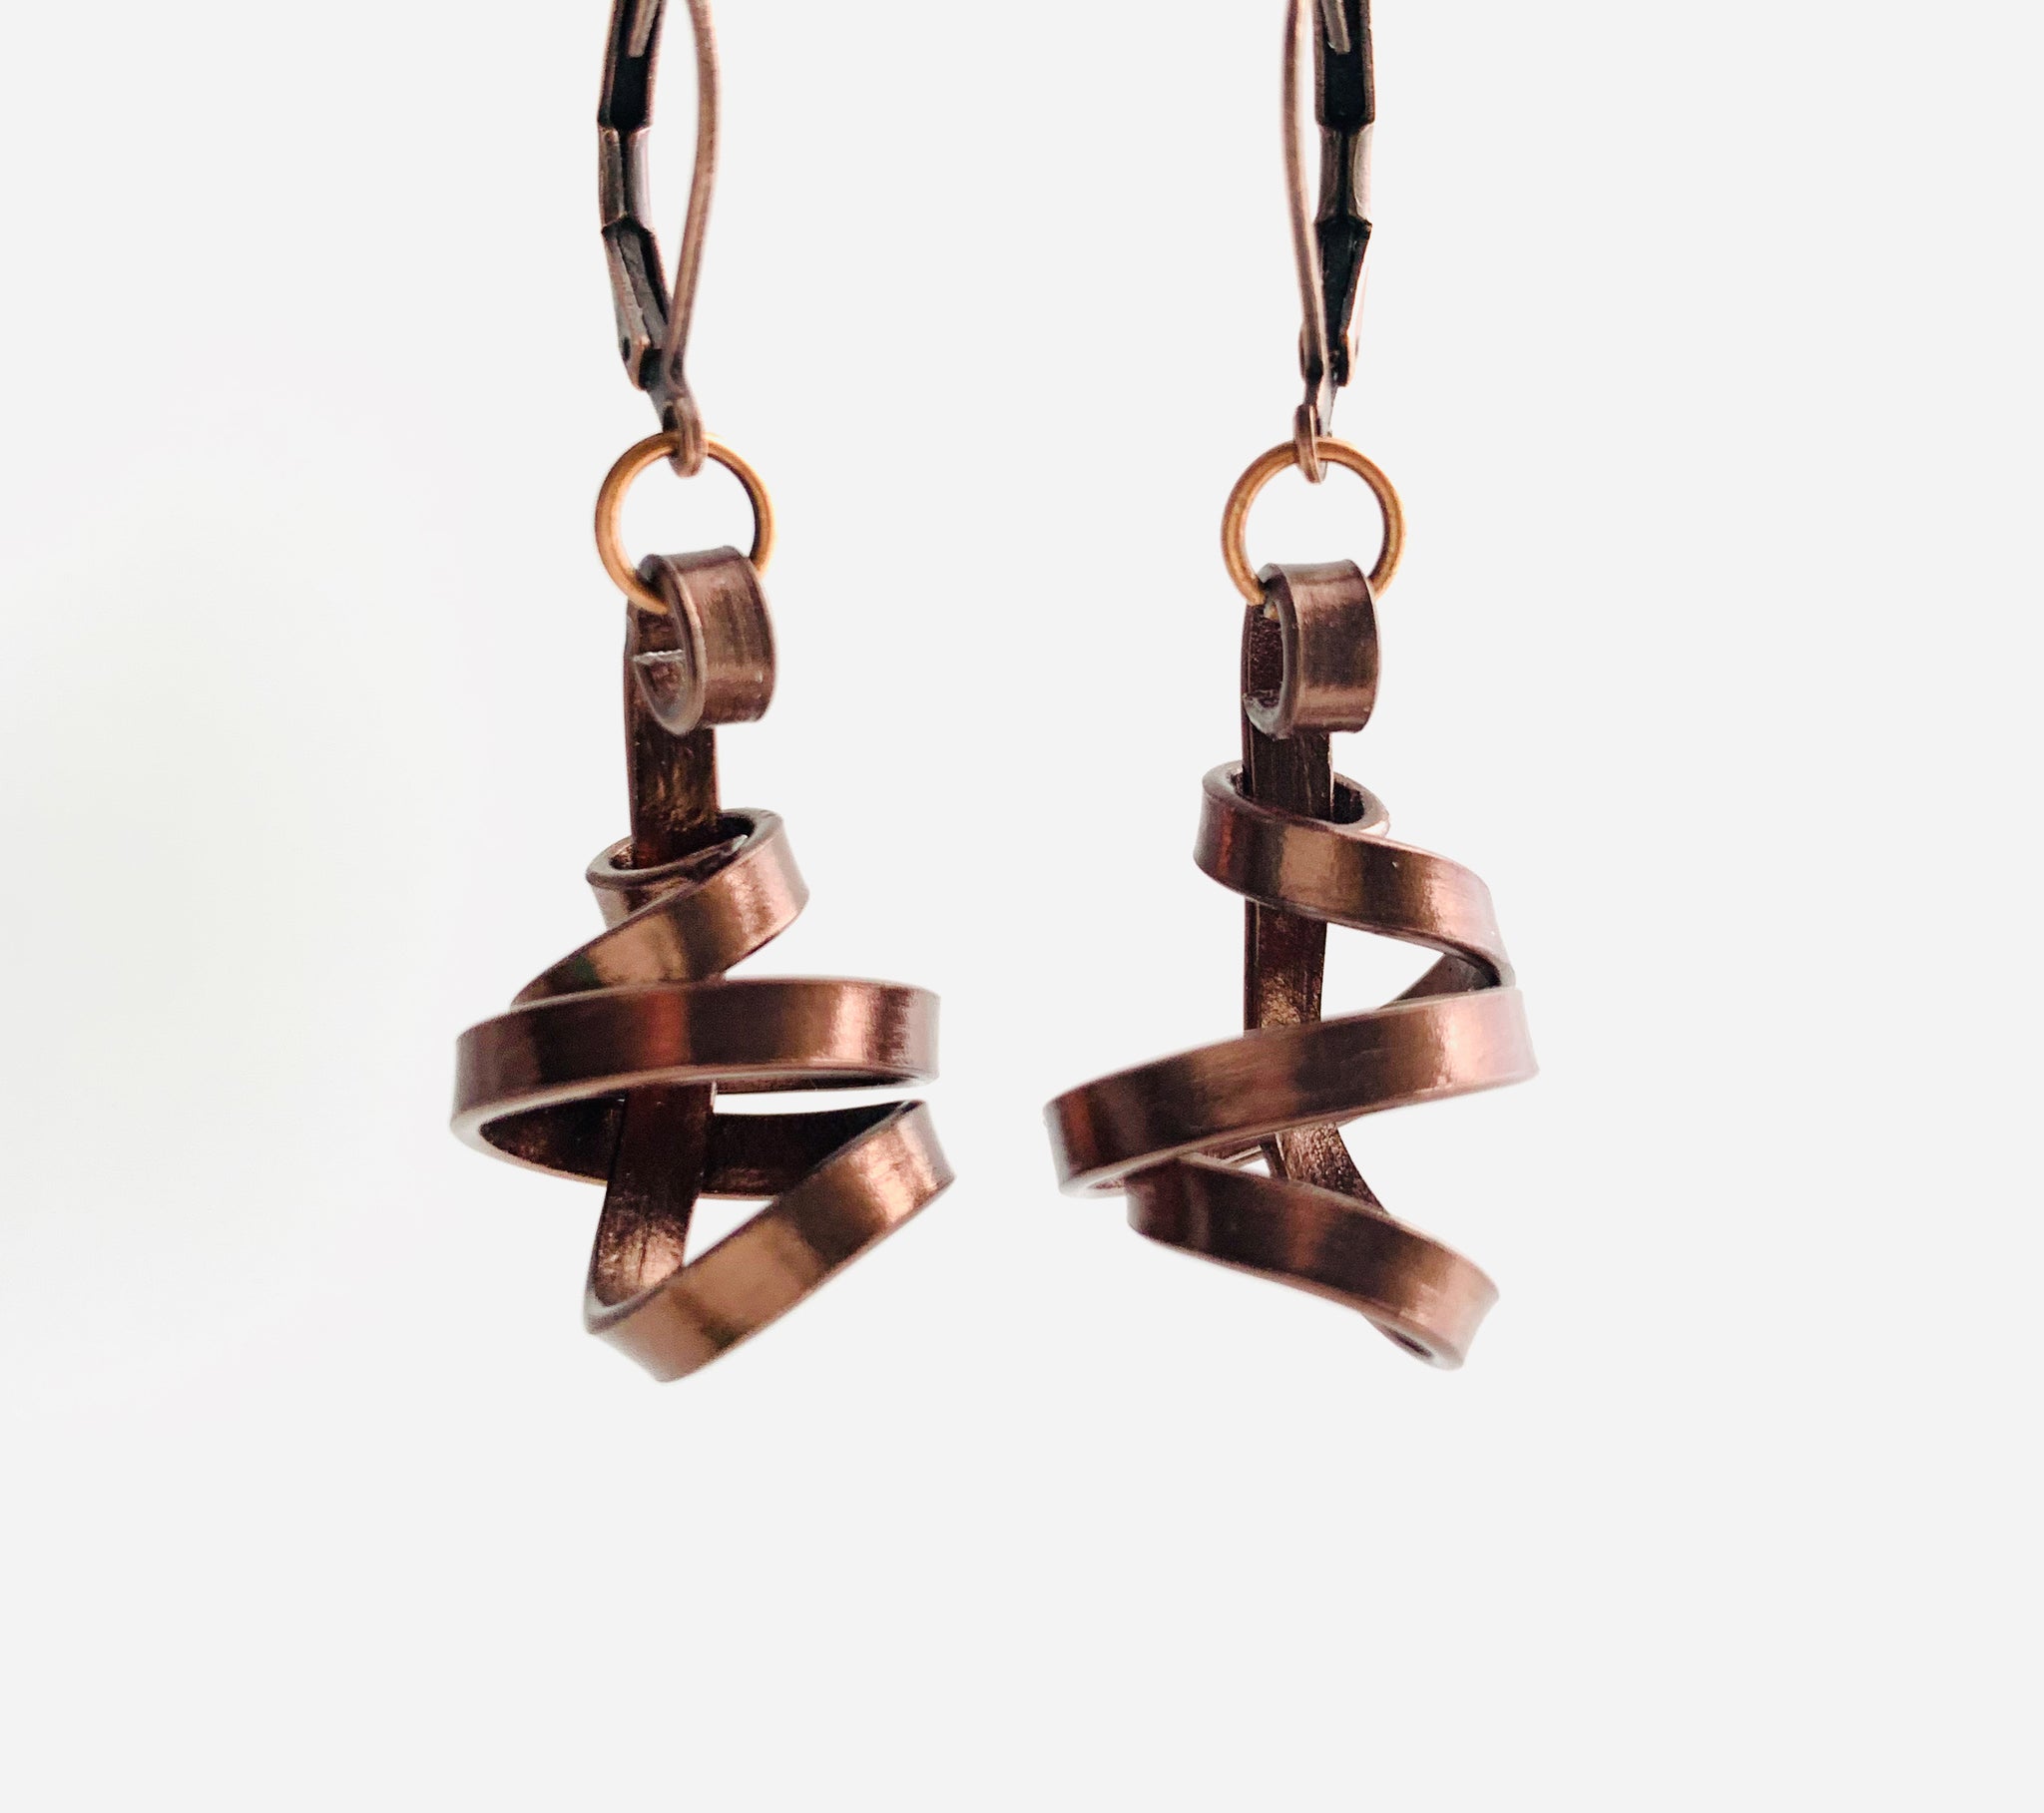 Once Made Earrings: Knotted Swirl earrings in bronze colour